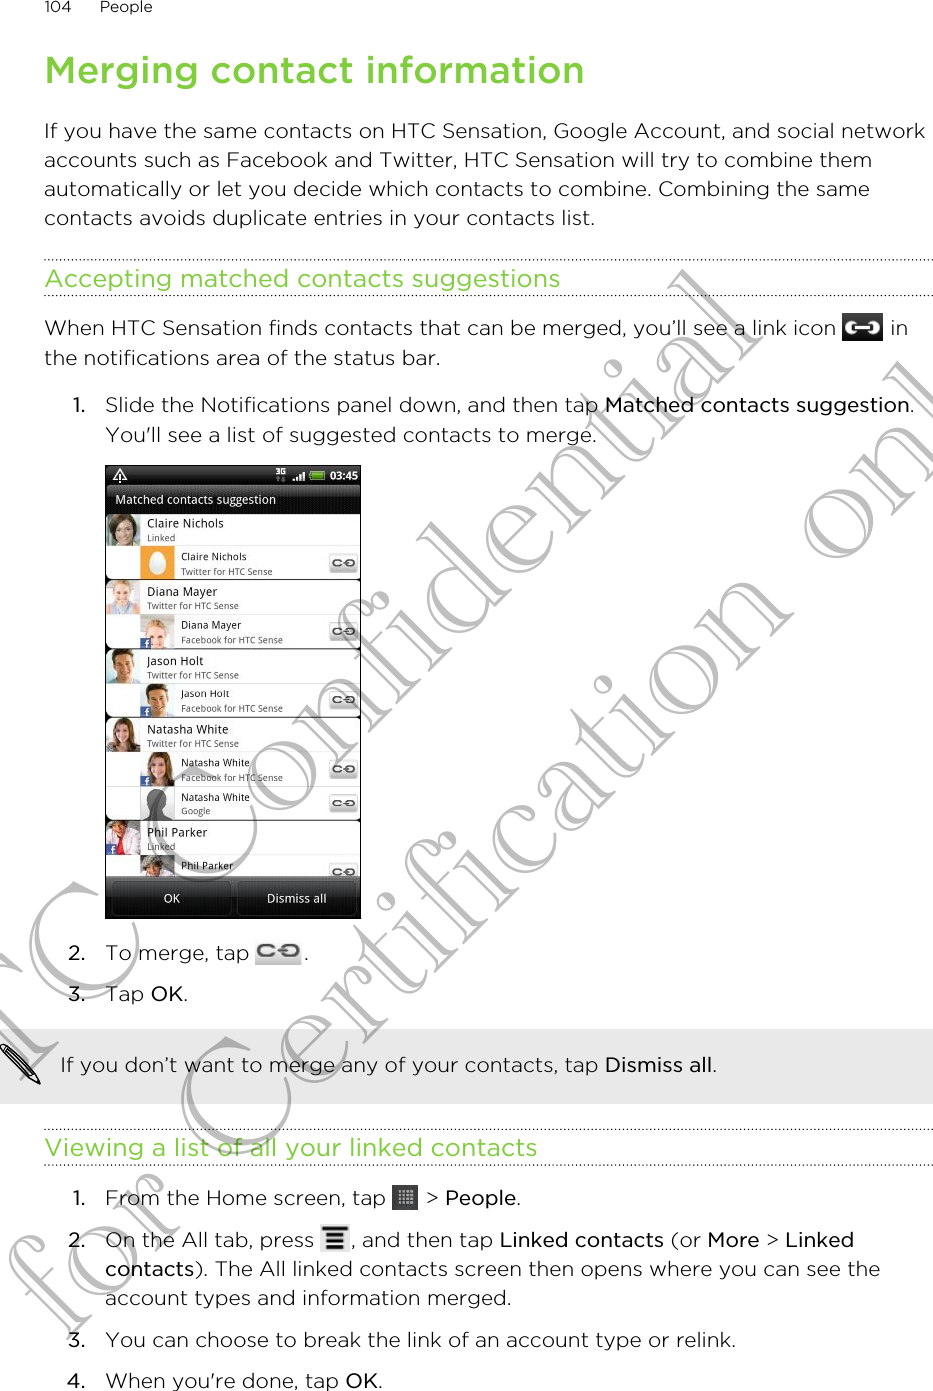 Merging contact informationIf you have the same contacts on HTC Sensation, Google Account, and social networkaccounts such as Facebook and Twitter, HTC Sensation will try to combine themautomatically or let you decide which contacts to combine. Combining the samecontacts avoids duplicate entries in your contacts list.Accepting matched contacts suggestionsWhen HTC Sensation finds contacts that can be merged, you’ll see a link icon   inthe notifications area of the status bar.1. Slide the Notifications panel down, and then tap Matched contacts suggestion.You&apos;ll see a list of suggested contacts to merge.2. To merge, tap  .3. Tap OK.If you don’t want to merge any of your contacts, tap Dismiss all.Viewing a list of all your linked contacts1. From the Home screen, tap   &gt; People.2. On the All tab, press  , and then tap Linked contacts (or More &gt; Linkedcontacts). The All linked contacts screen then opens where you can see theaccount types and information merged.3. You can choose to break the link of an account type or relink.4. When you&apos;re done, tap OK.104 PeopleHTC Confidential for Certification only